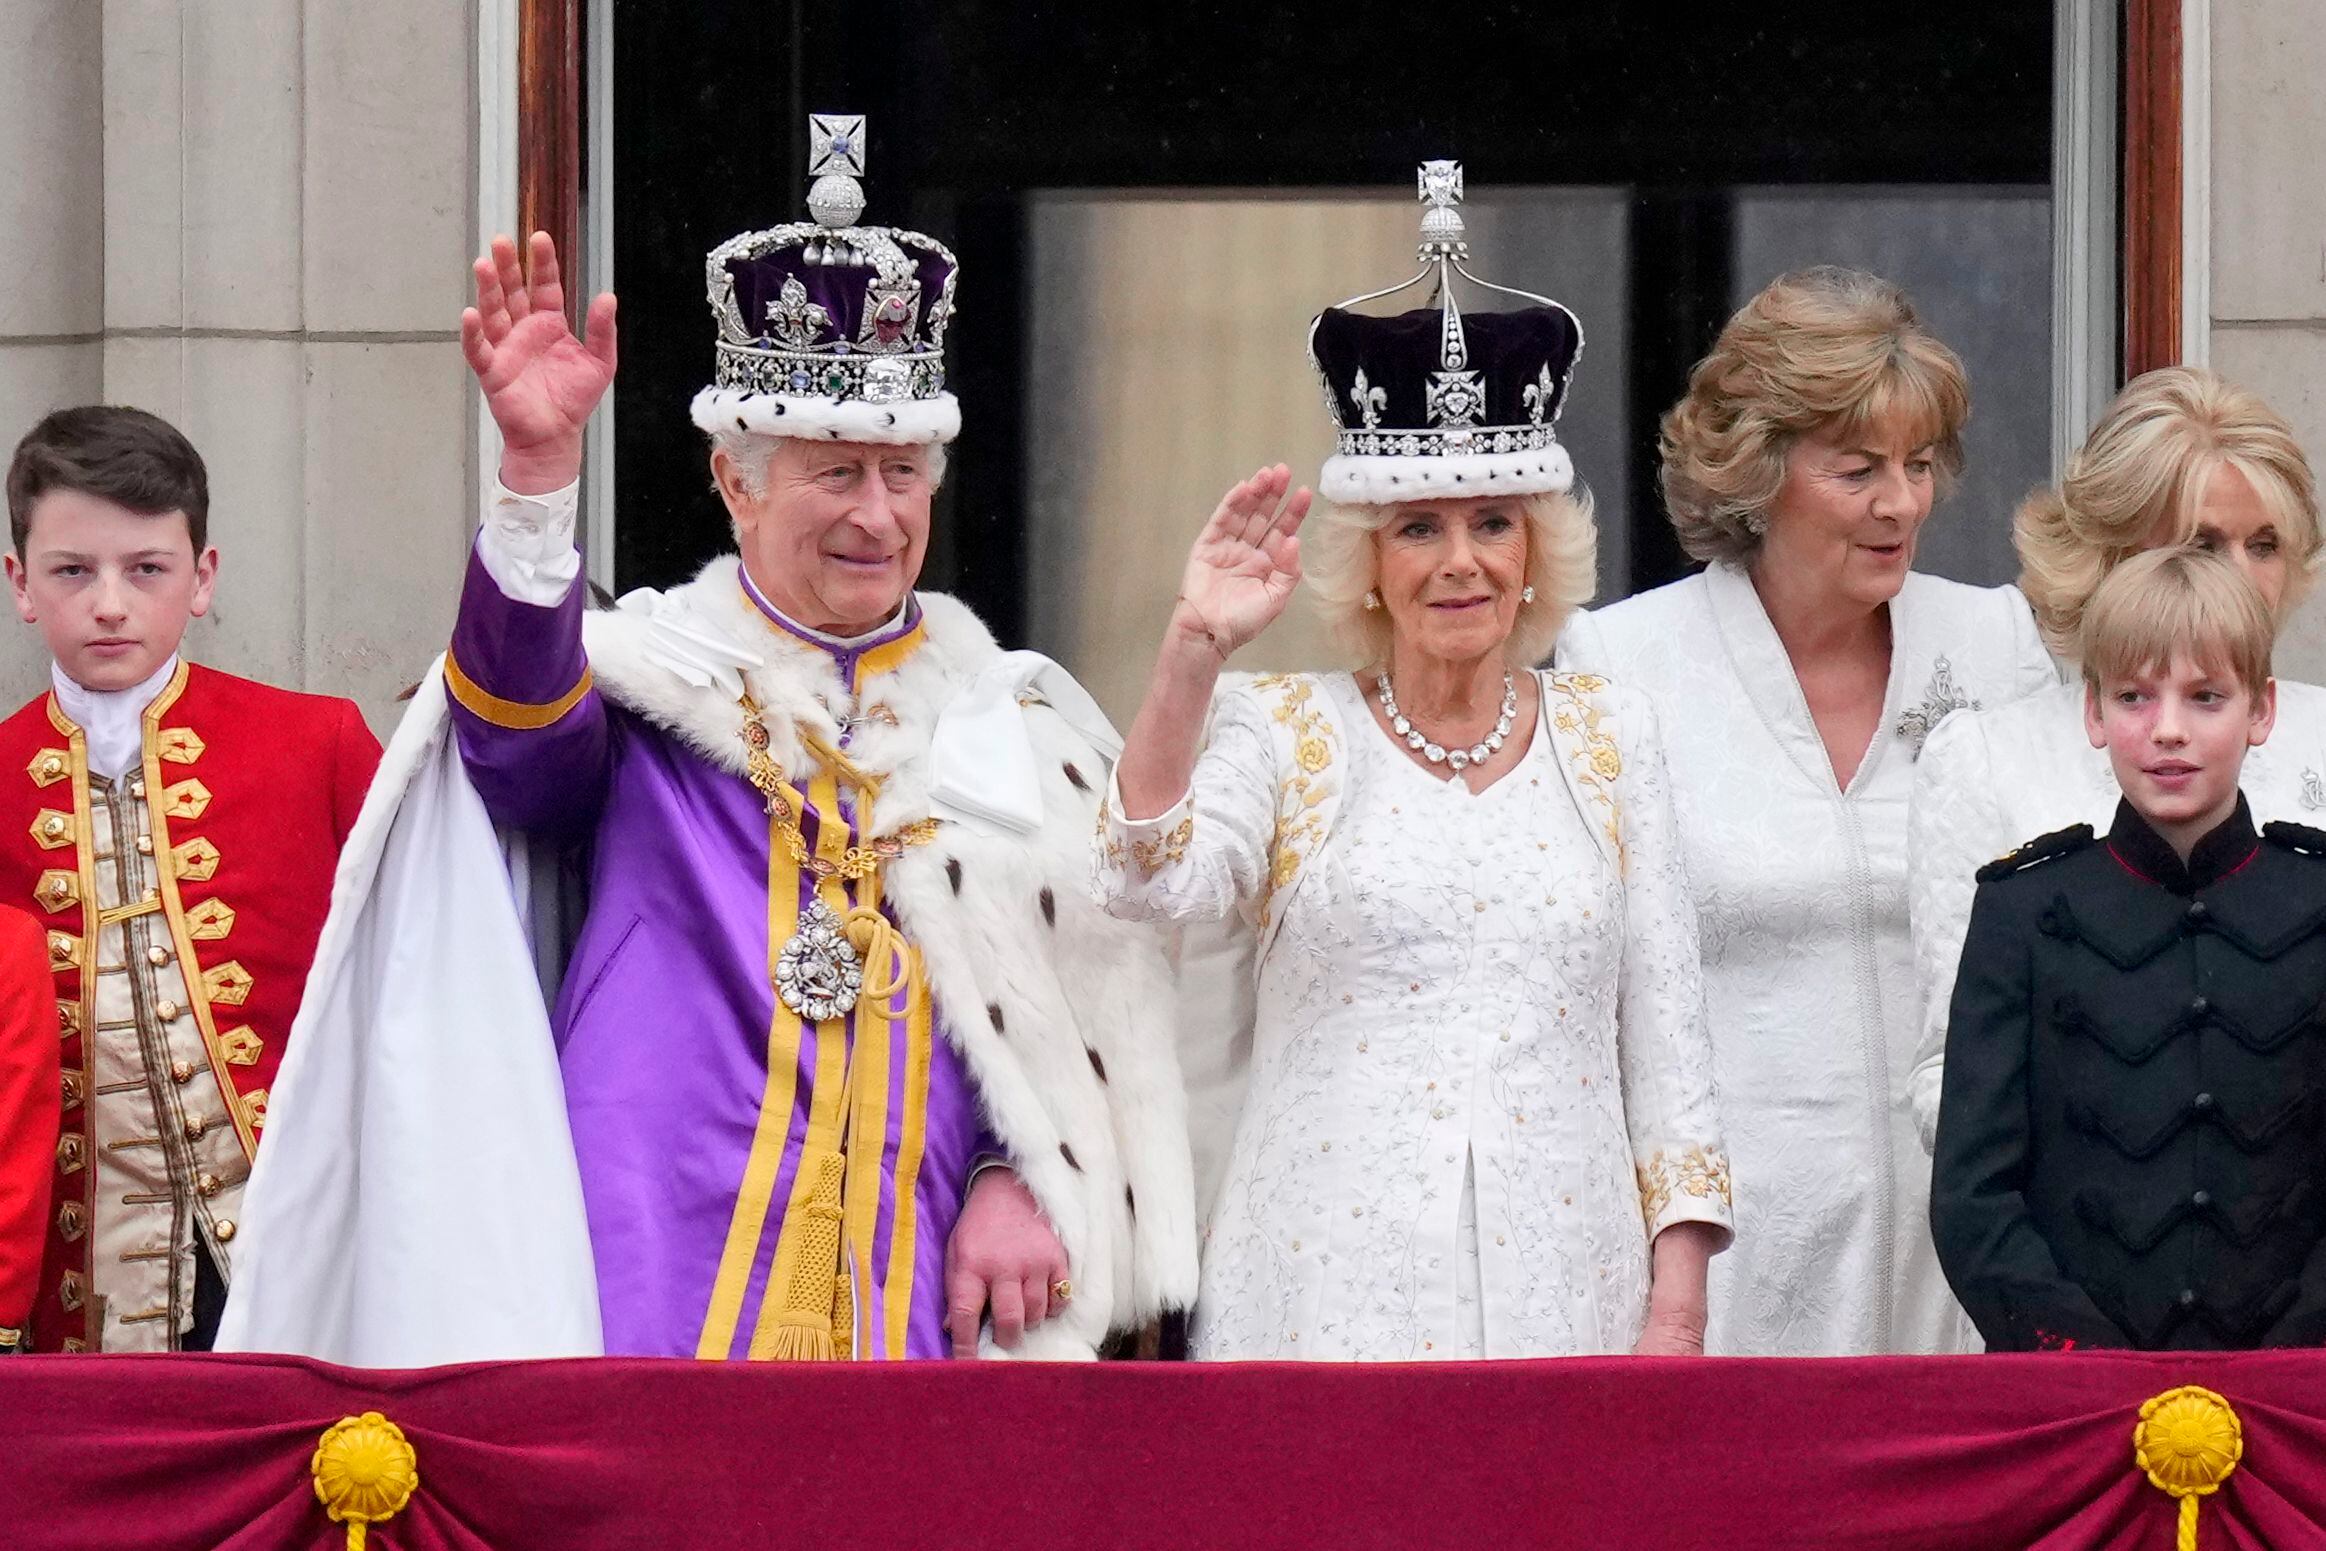 Britain's King Charles III and Queen Camilla wave to the crowds from the balcony of Buckingham Palace after their coronation ceremony, in London, Saturday, May 6, 2023. (AP Photo/Petr David Josek)